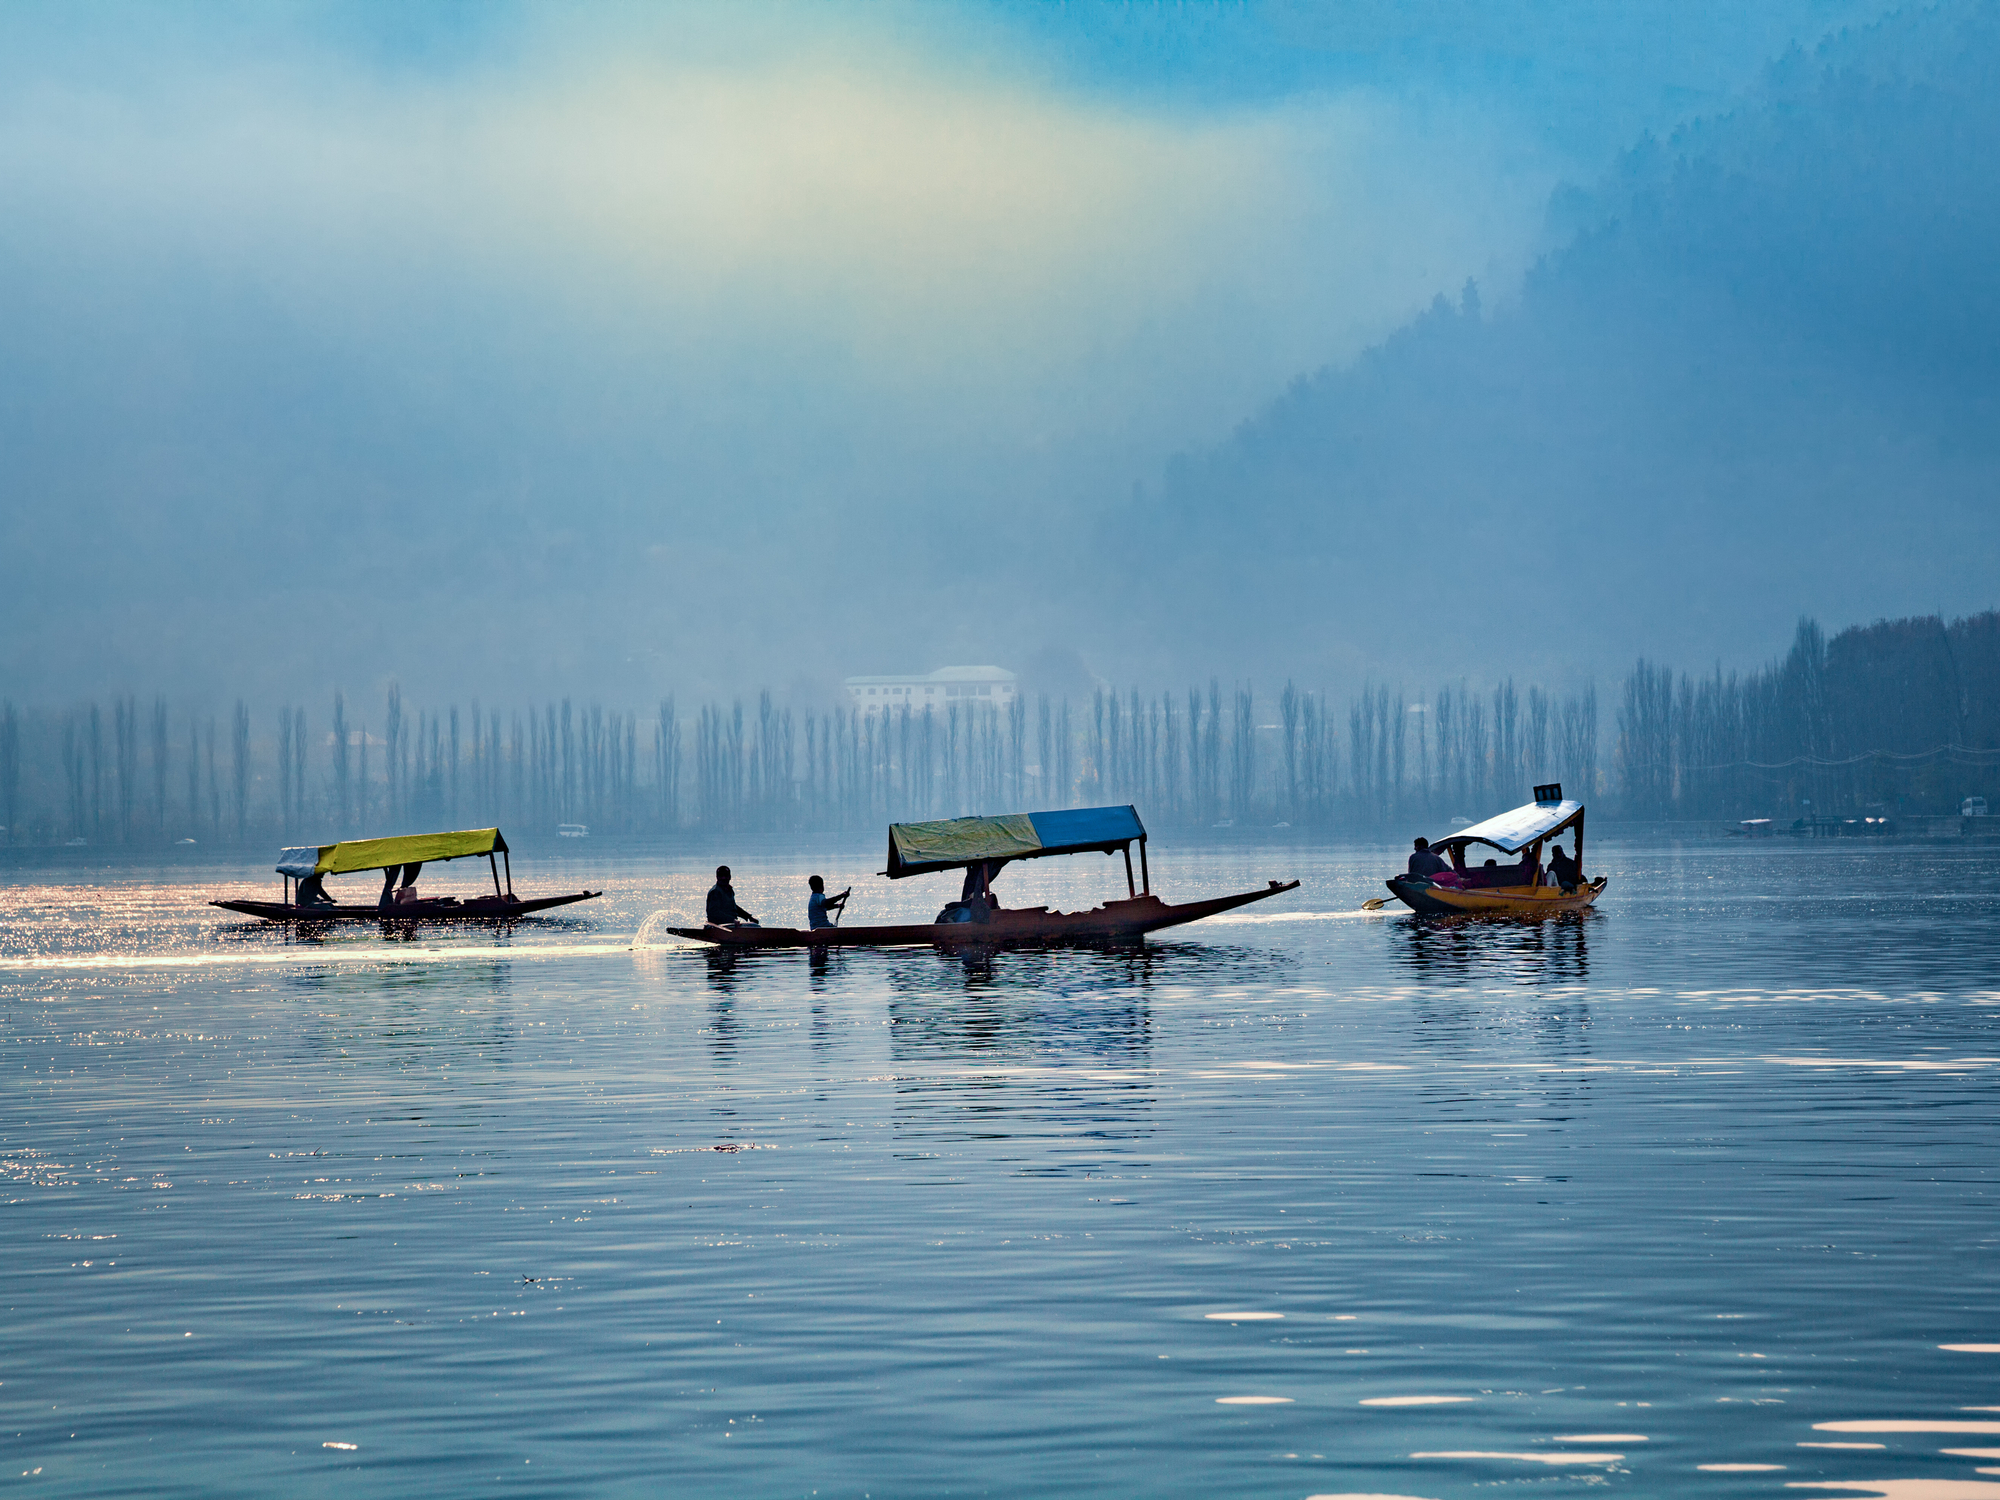 Direct evening flights to boost tourism in Kashmir